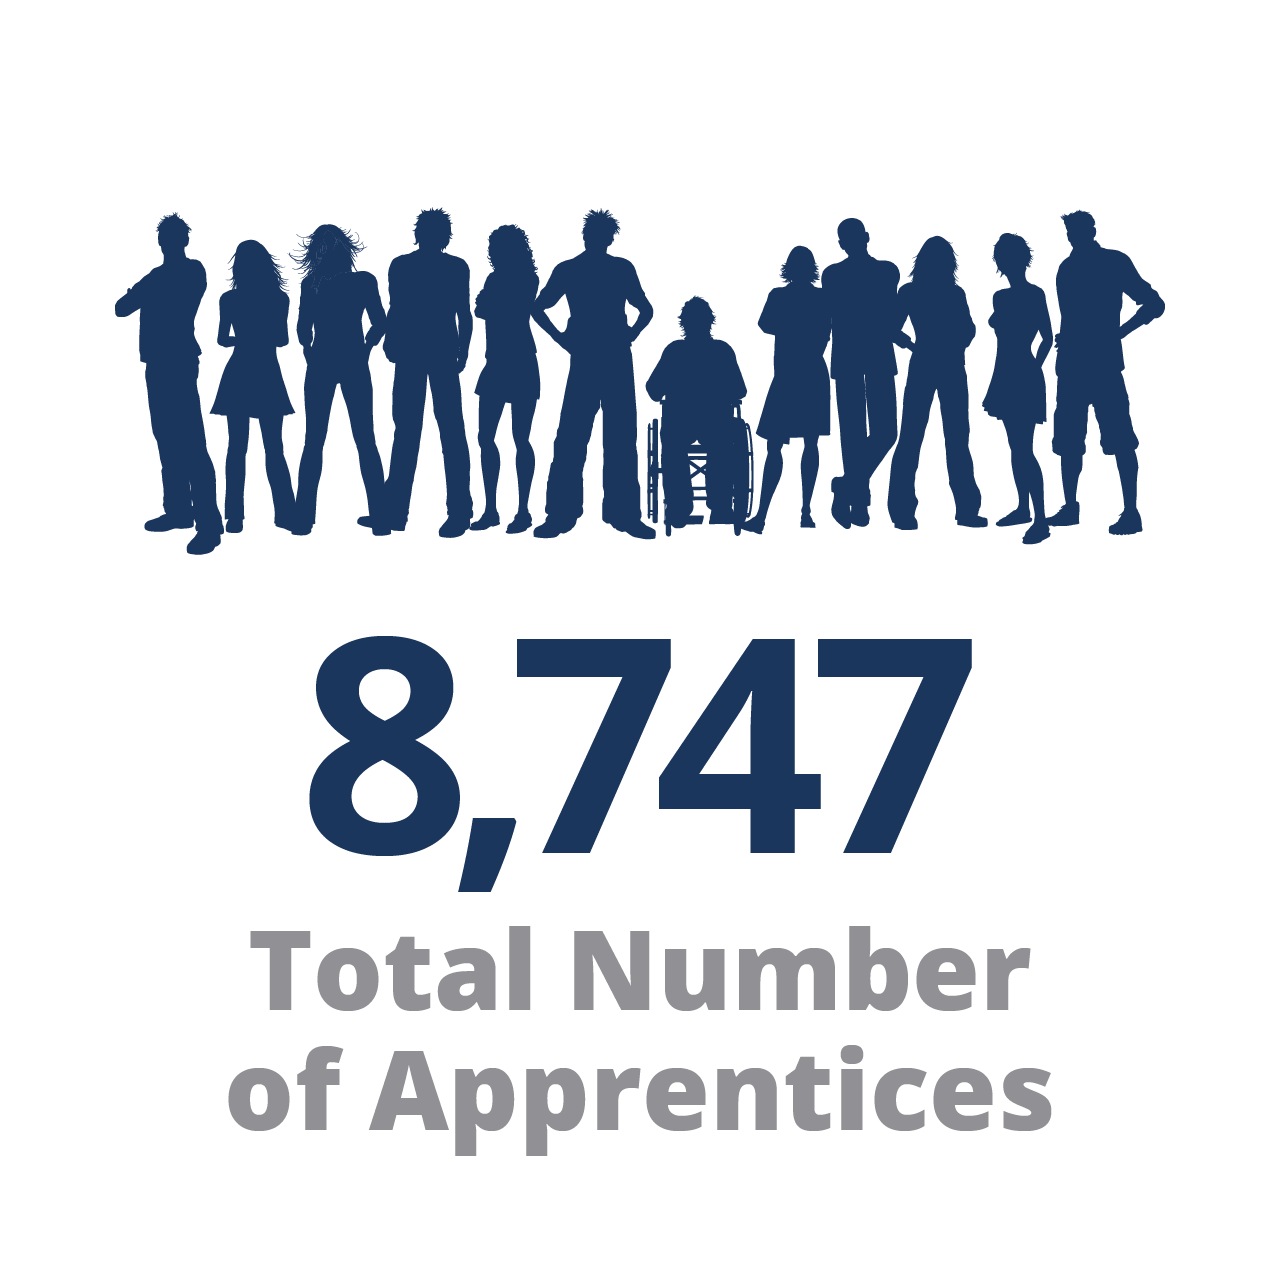 7,239 Total Number of Apprentices